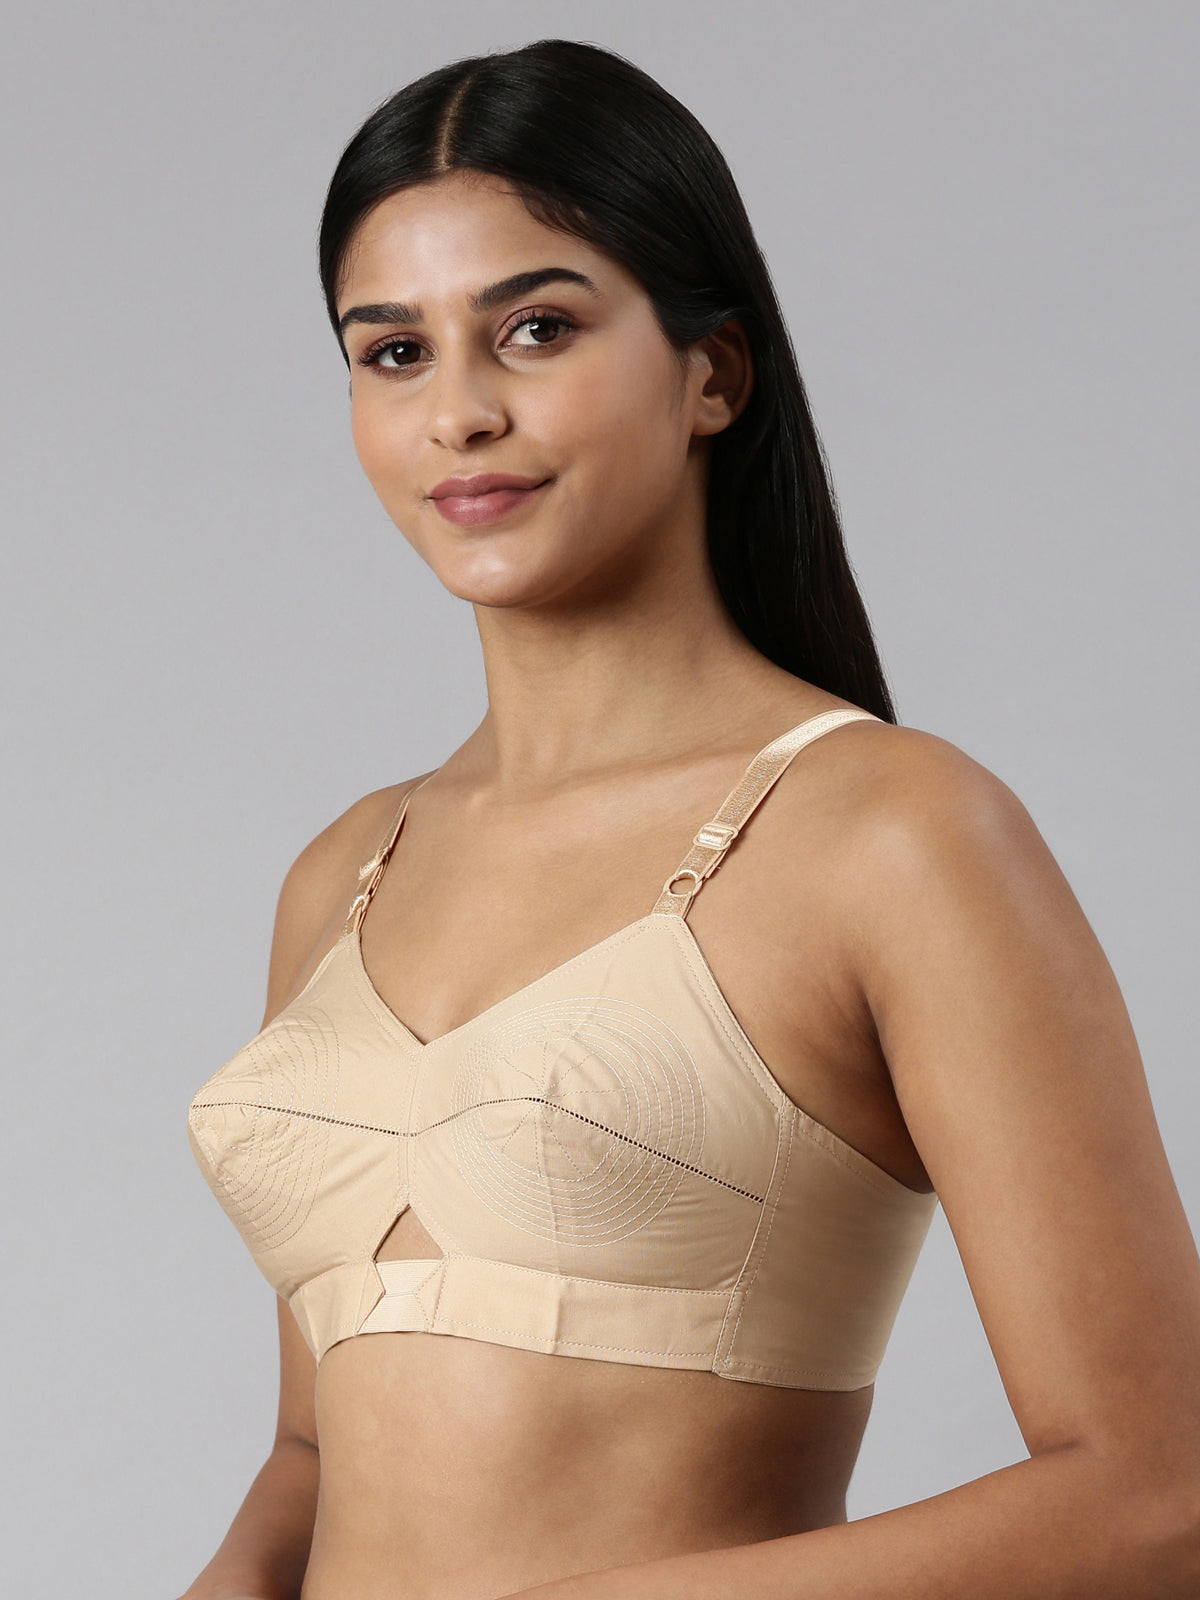 blossom-authentic bra-B Cup-skin2-Woven cotton-everyday bra